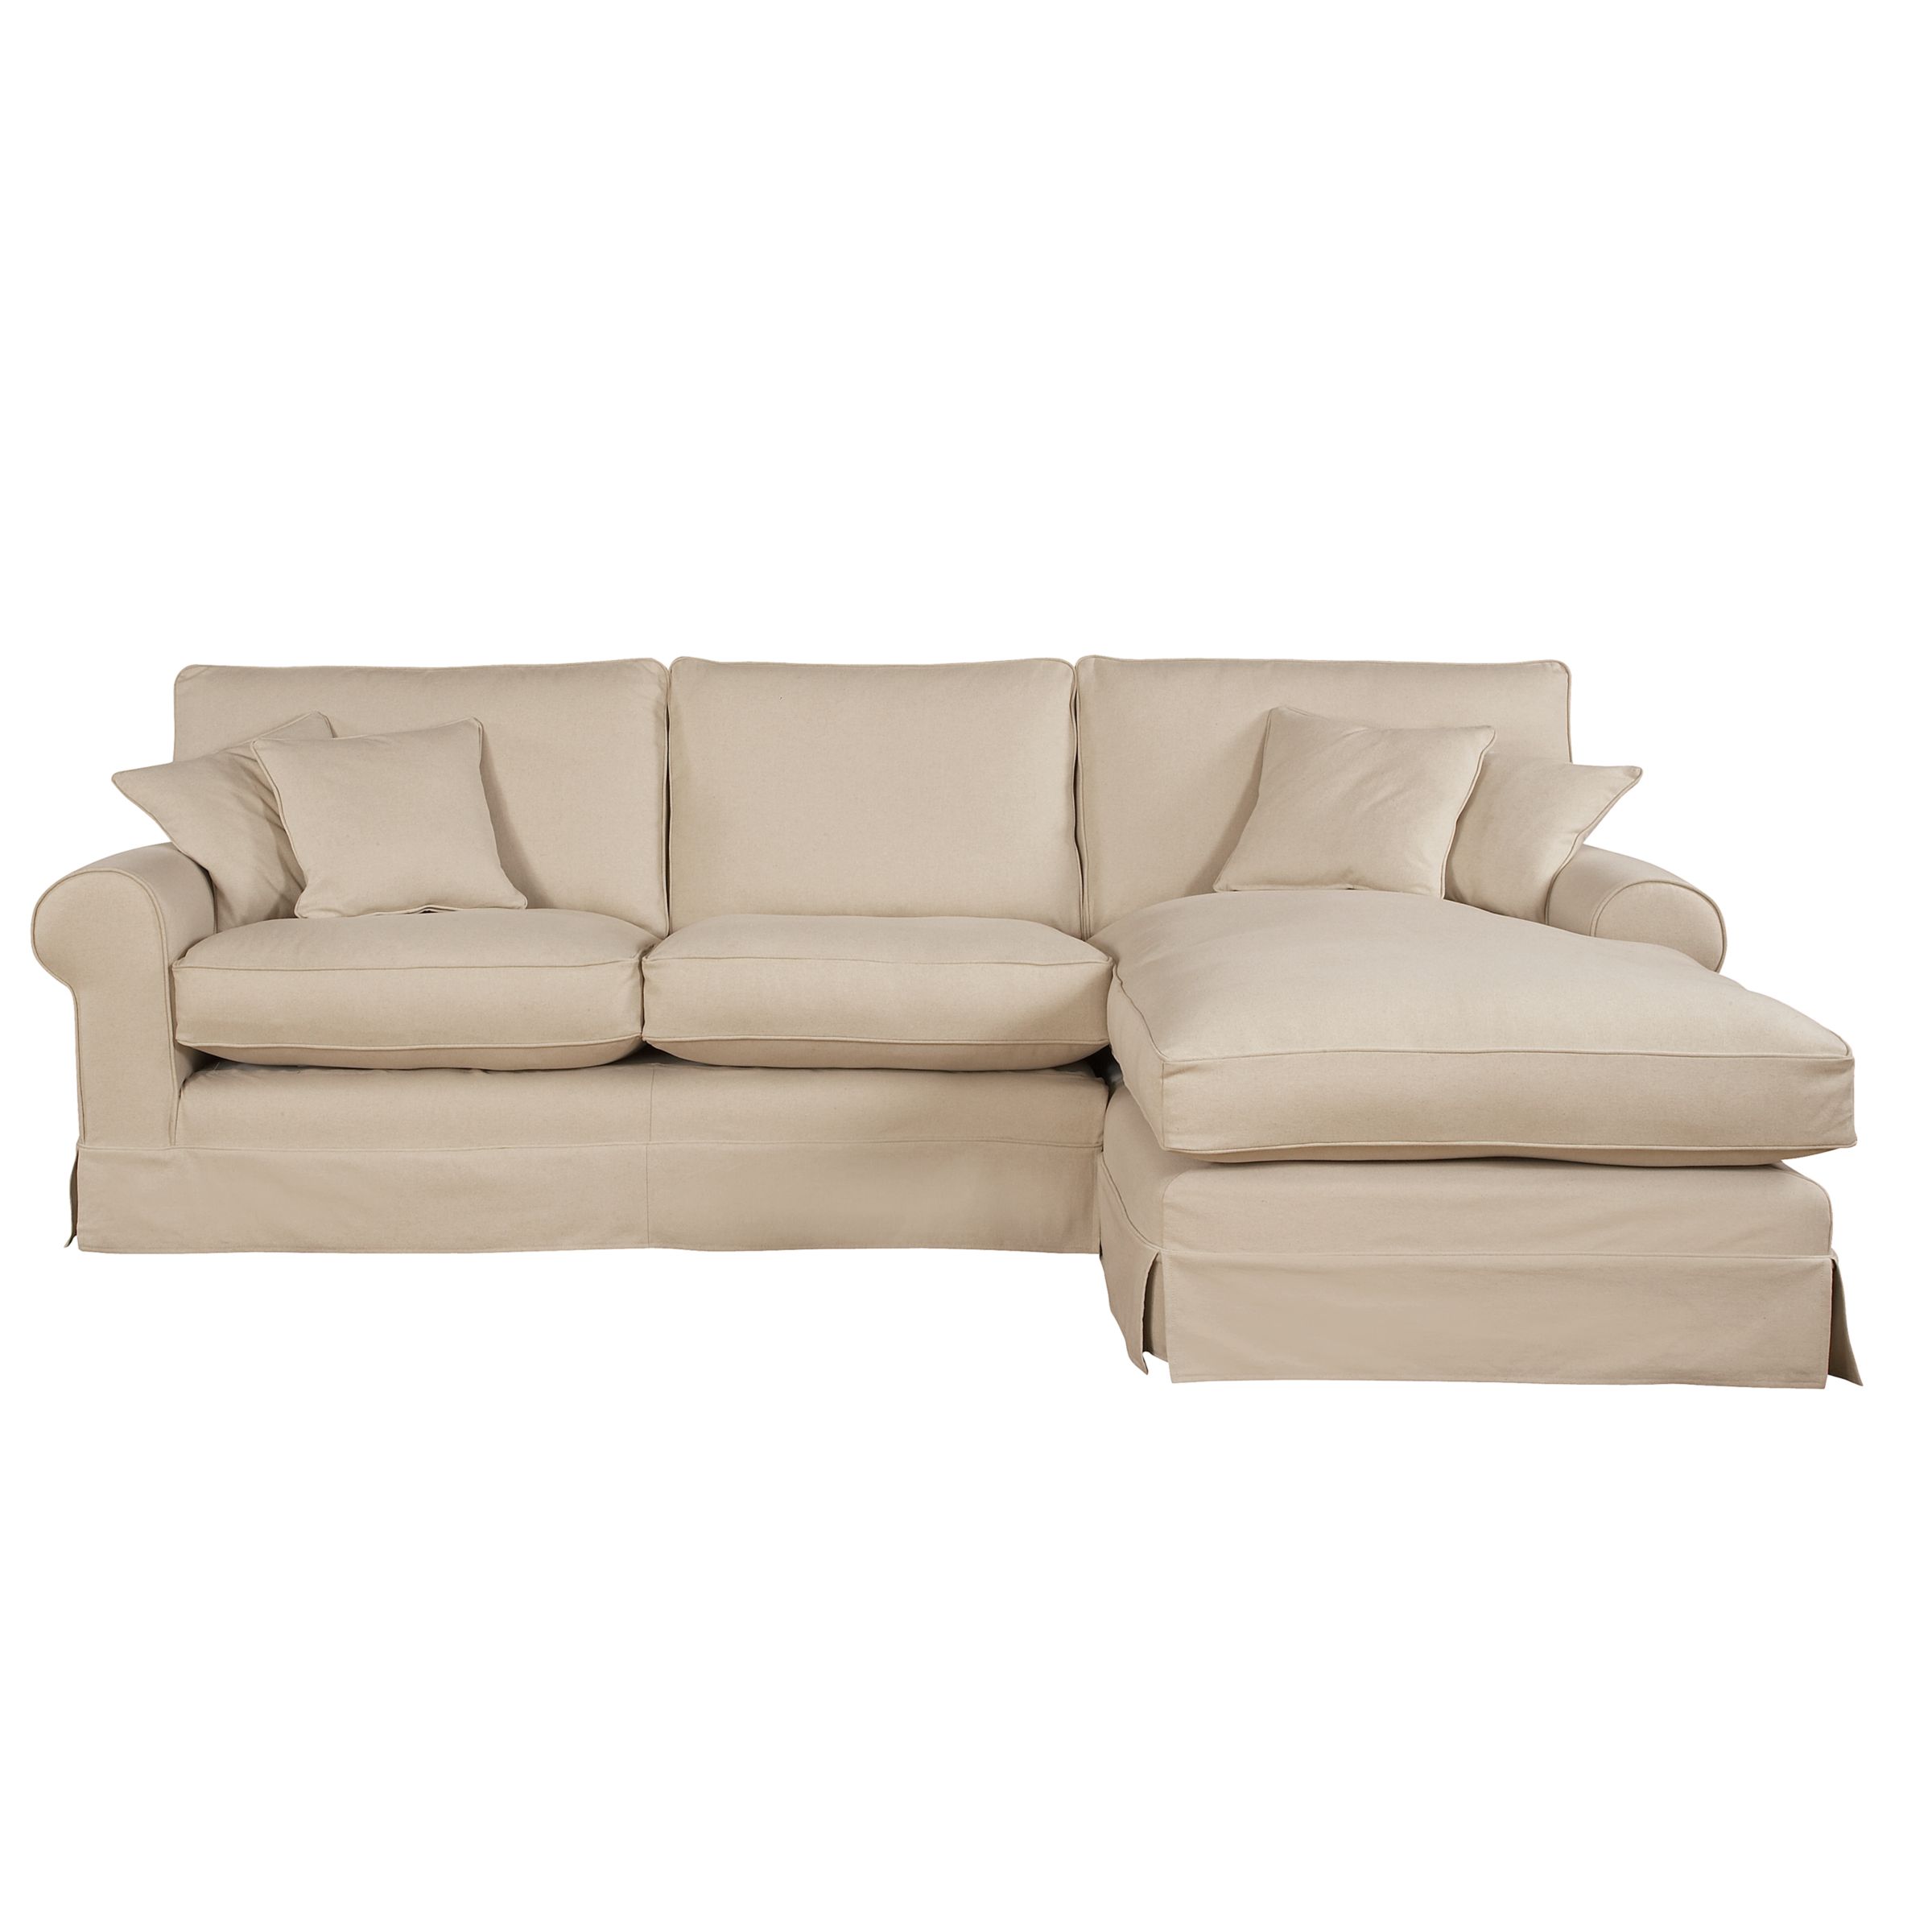 Padstow RHF Chaise End Sofa 308252